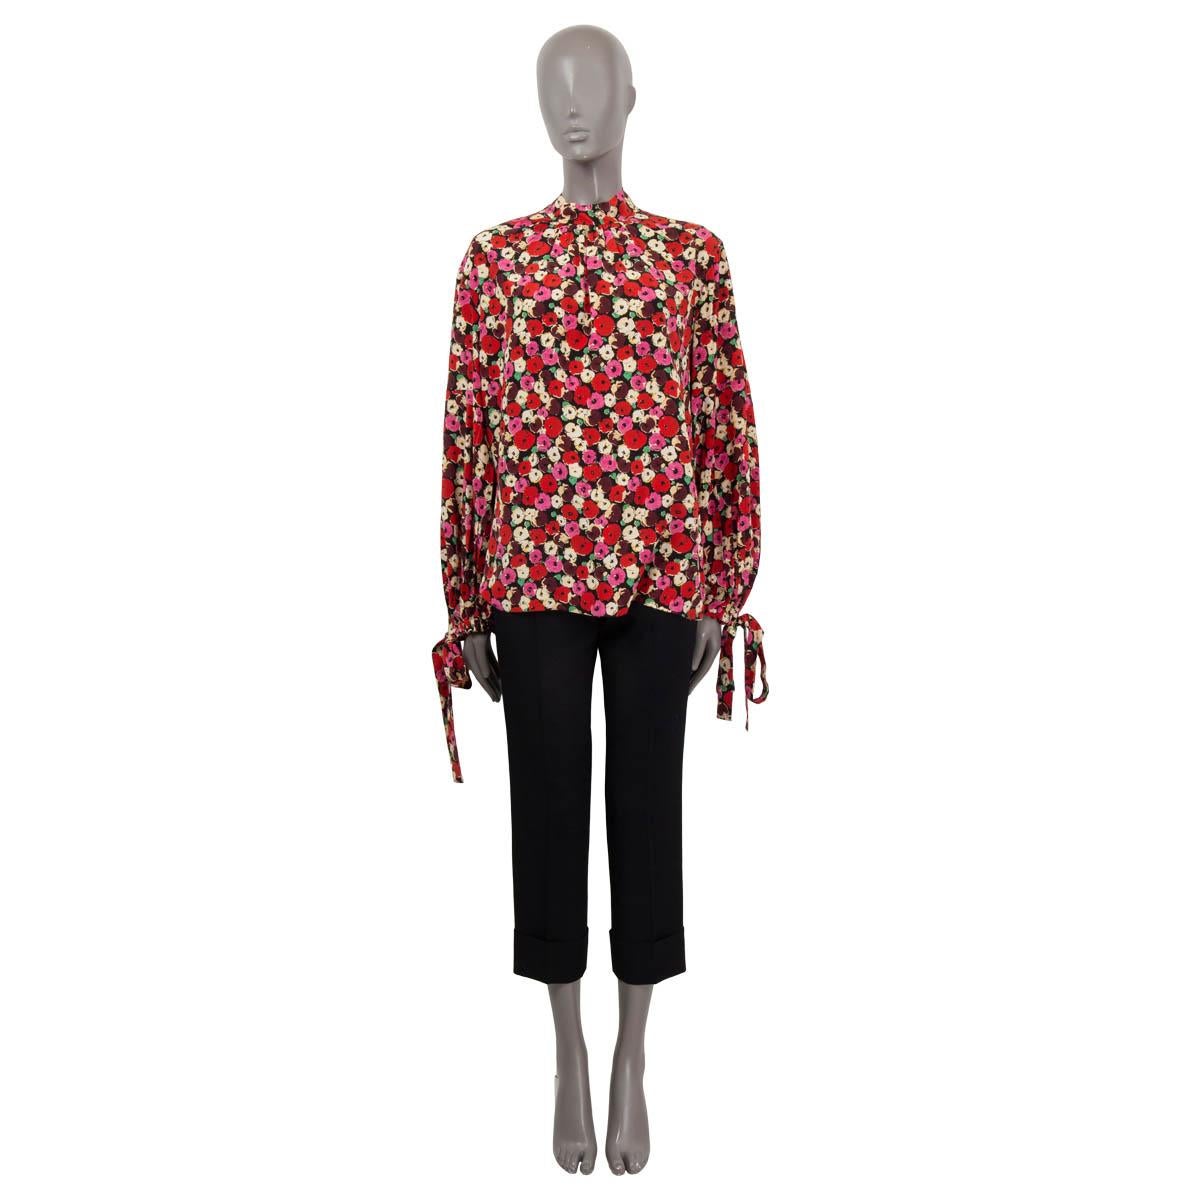 100% authentic Prada floral-print blouse in silk (100%) black, red, pink, purple and yellow. Features a loose fit silhouette and a V-neck in the back. Has a self-tie pussy-bow that can be worn undone, knotted or draped in the back. Has been worn and